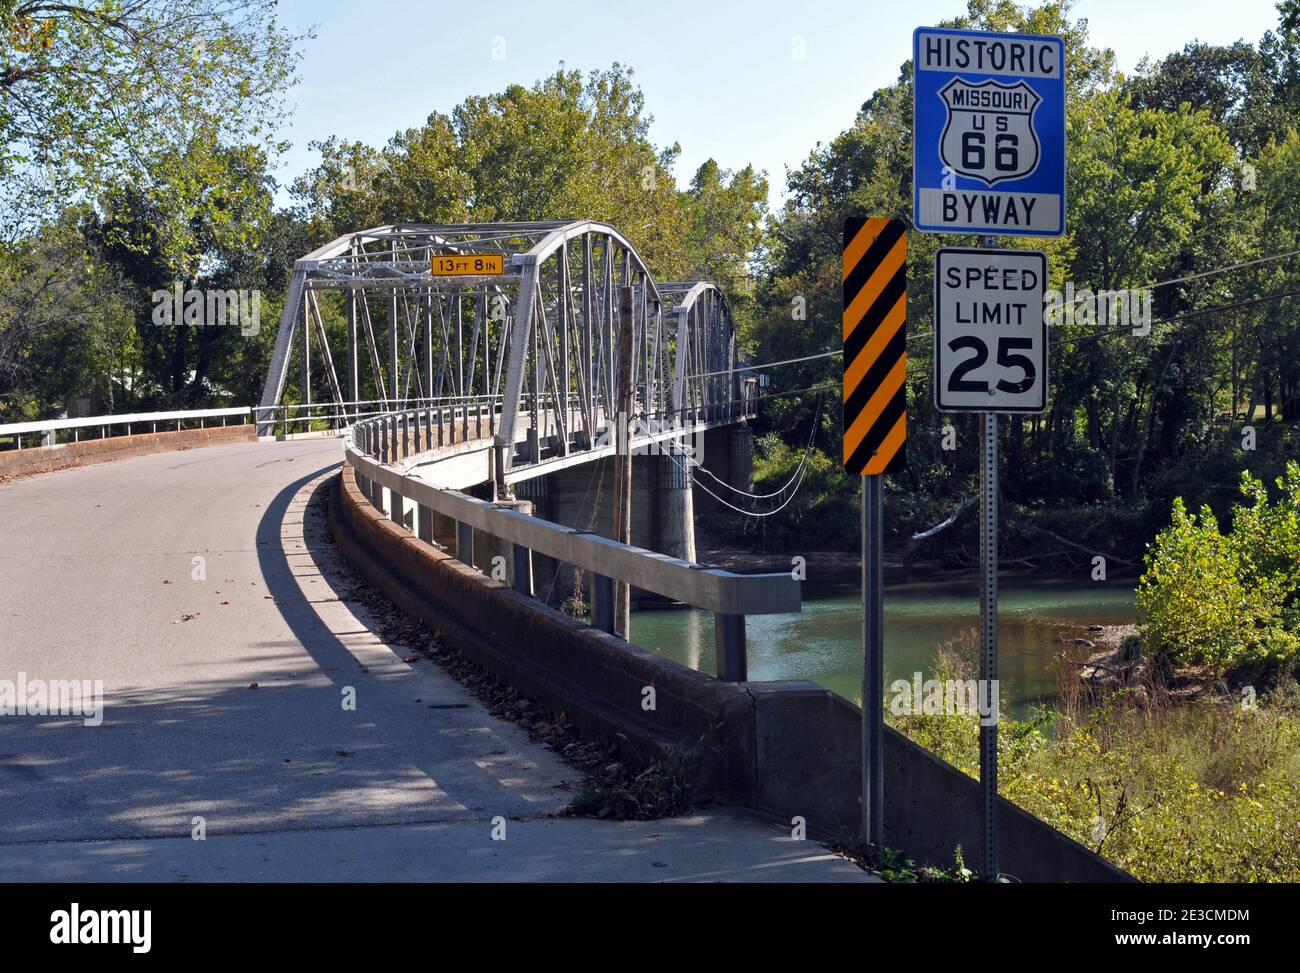 This historic bridge, built in 1923, carried the original Route 66 alignment across the Big Piney River at the village of Devils Elbow, Missouri. Stock Photo